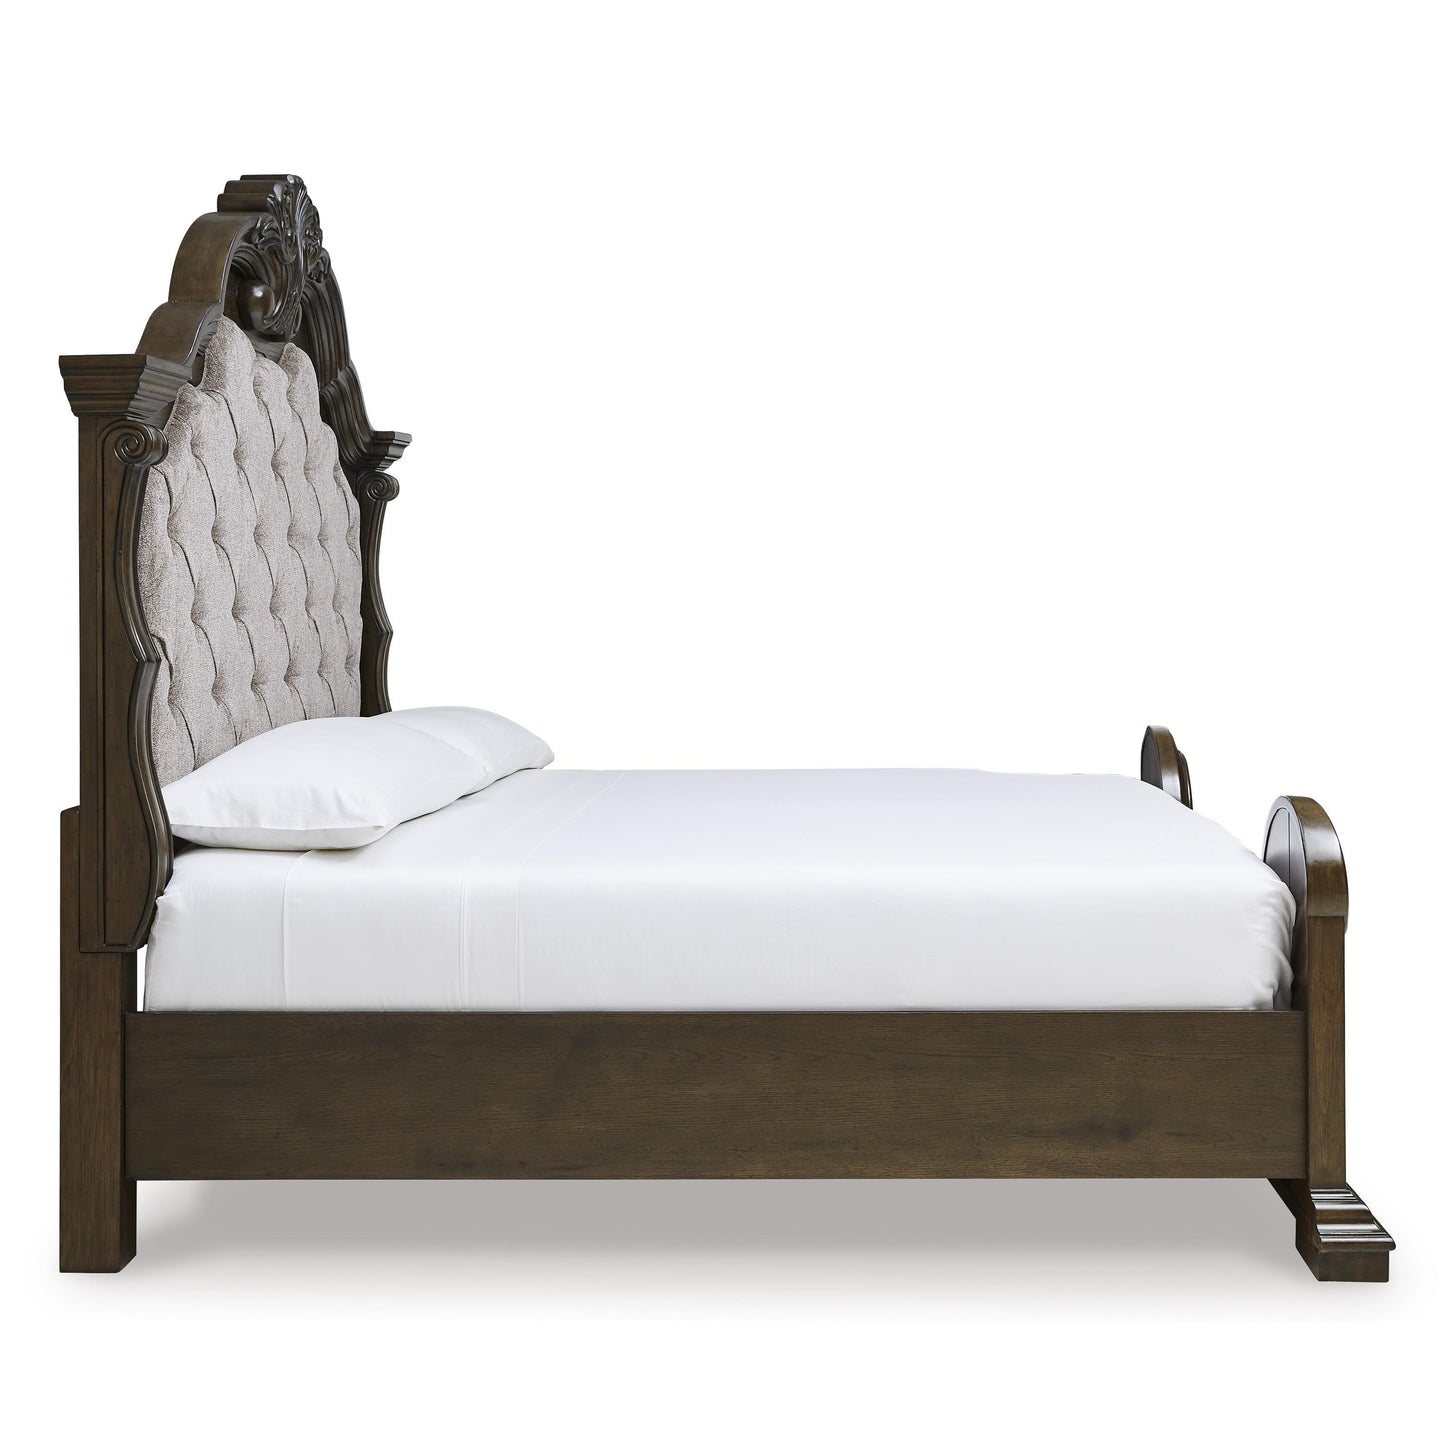 Signature Design by Ashley Maylee King Upholstered Bed B947-58/B947-56/B947-97 IMAGE 3